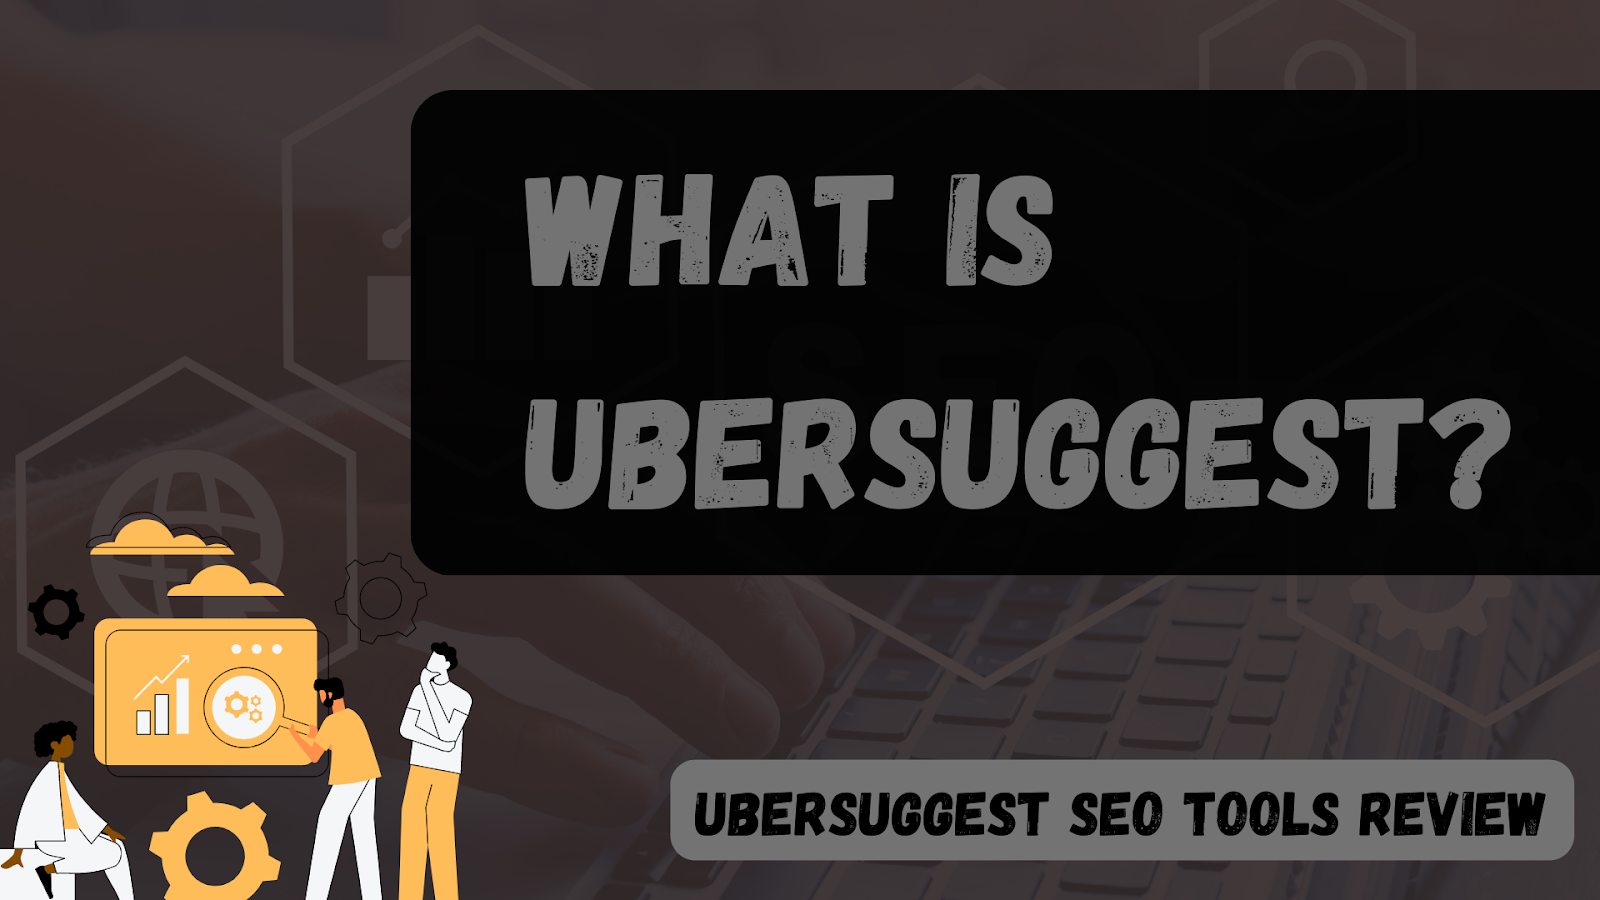 What Is Ubersuggest?